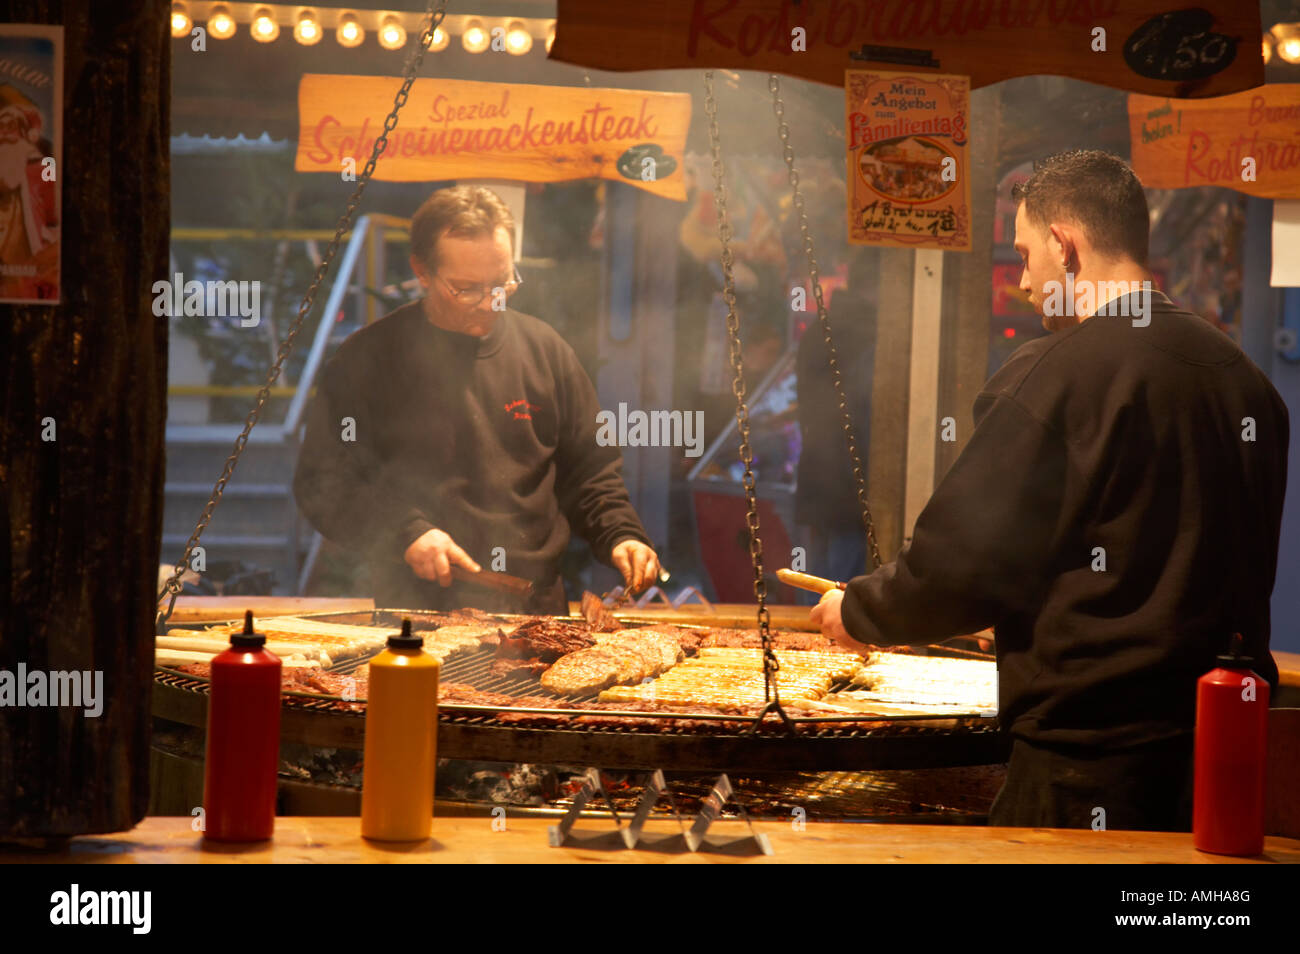 Two men on a fast food meat selling stall cook rostbratwurst and steak on a huge open grill spandau christmas market Berlin Stock Photo